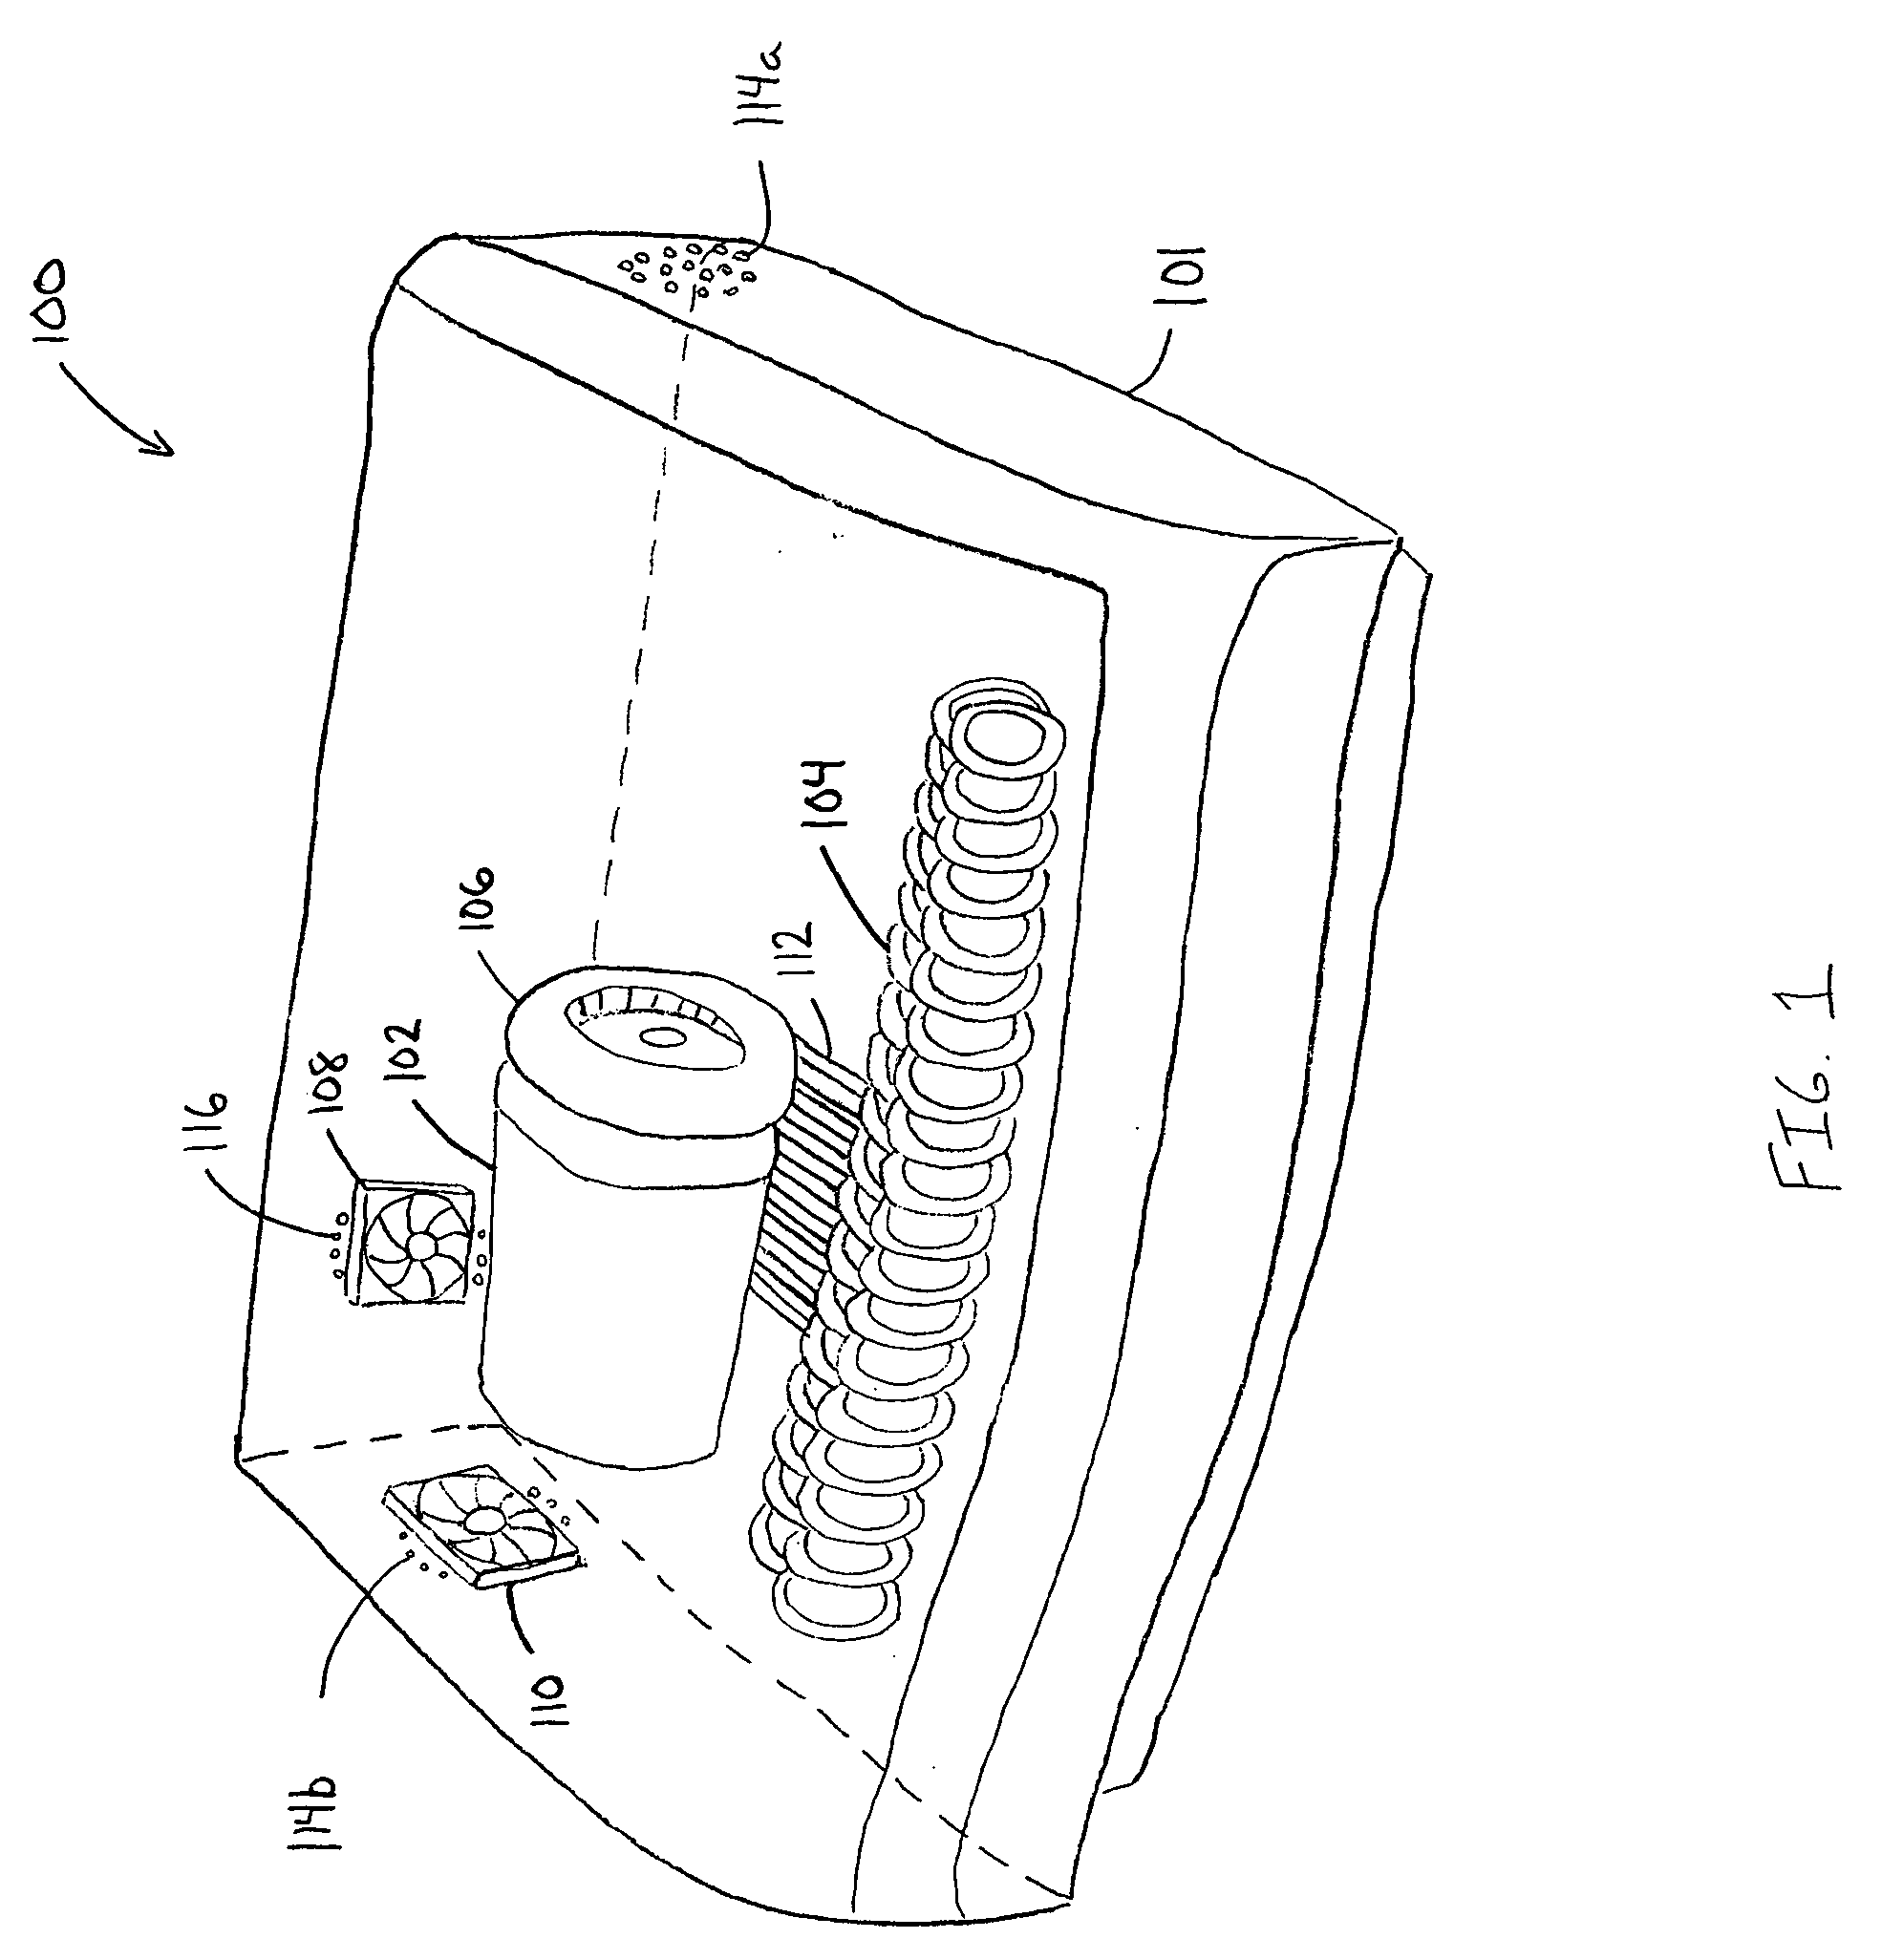 Systems and methods for thermal regulation of shredding device